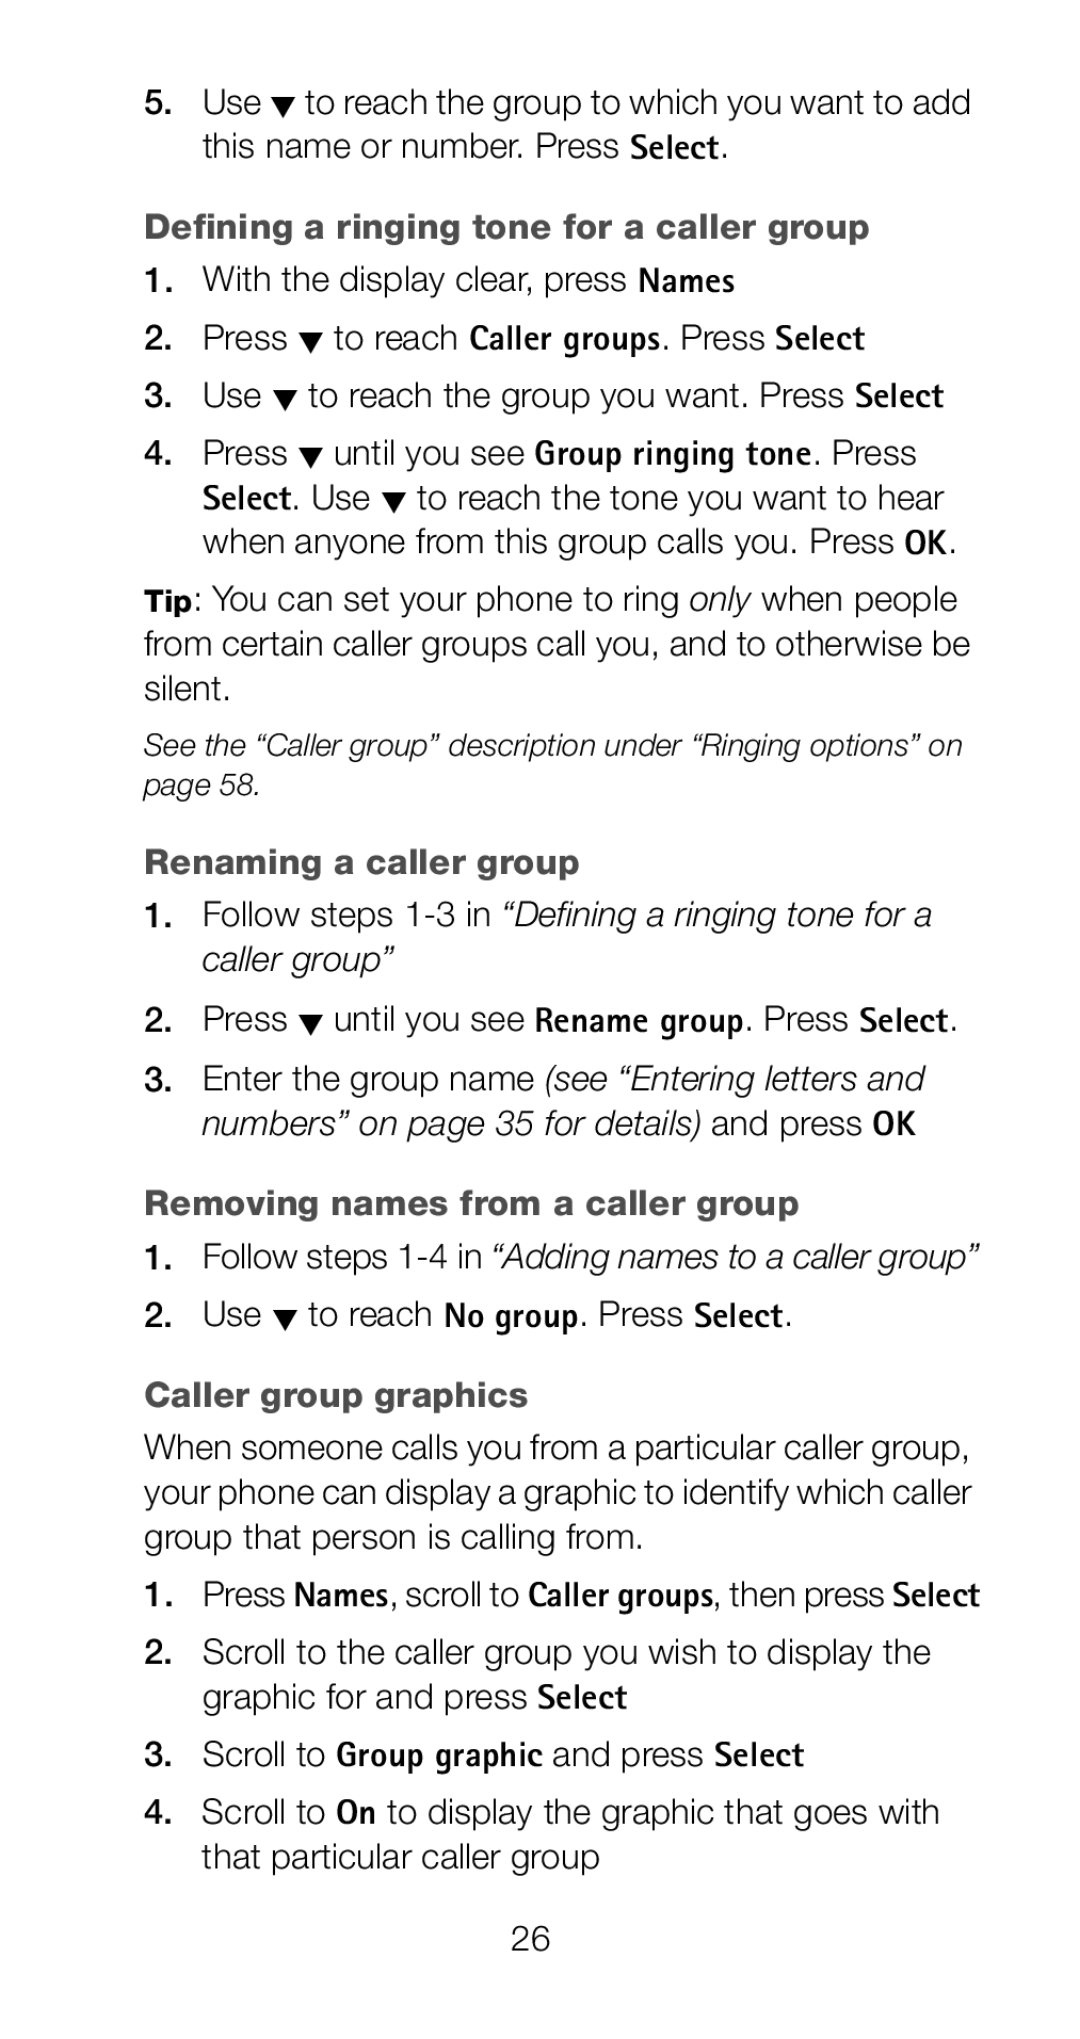 Nokia 6161i Defining a ringing tone for a caller group, Renaming a caller group, Removing names from a caller group 